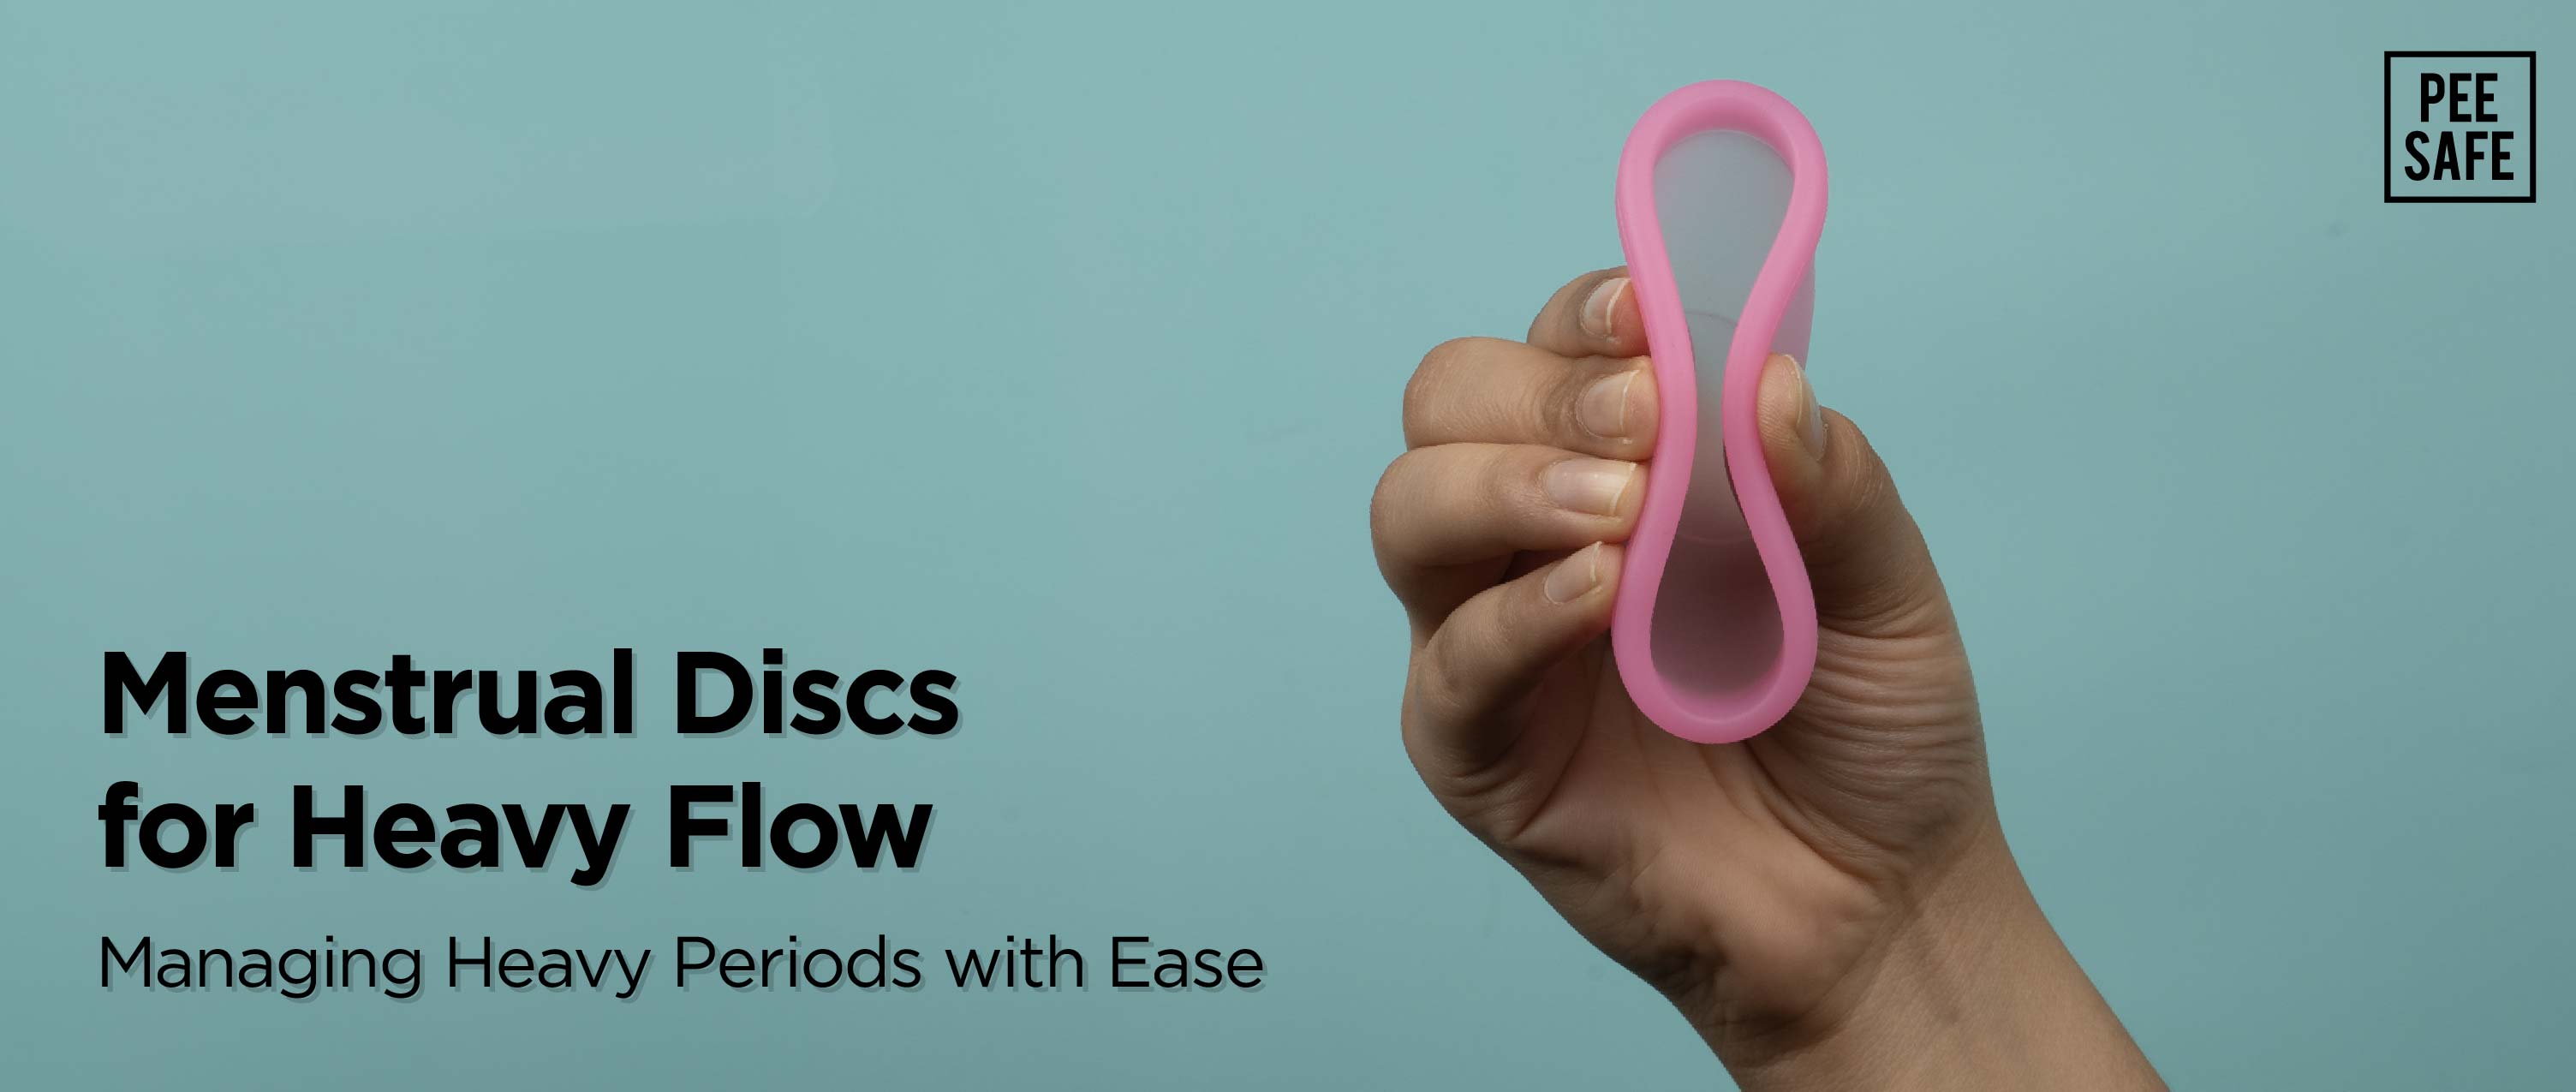  Menstrual Discs for Heavy Flow: Managing Heavy Periods with Ease